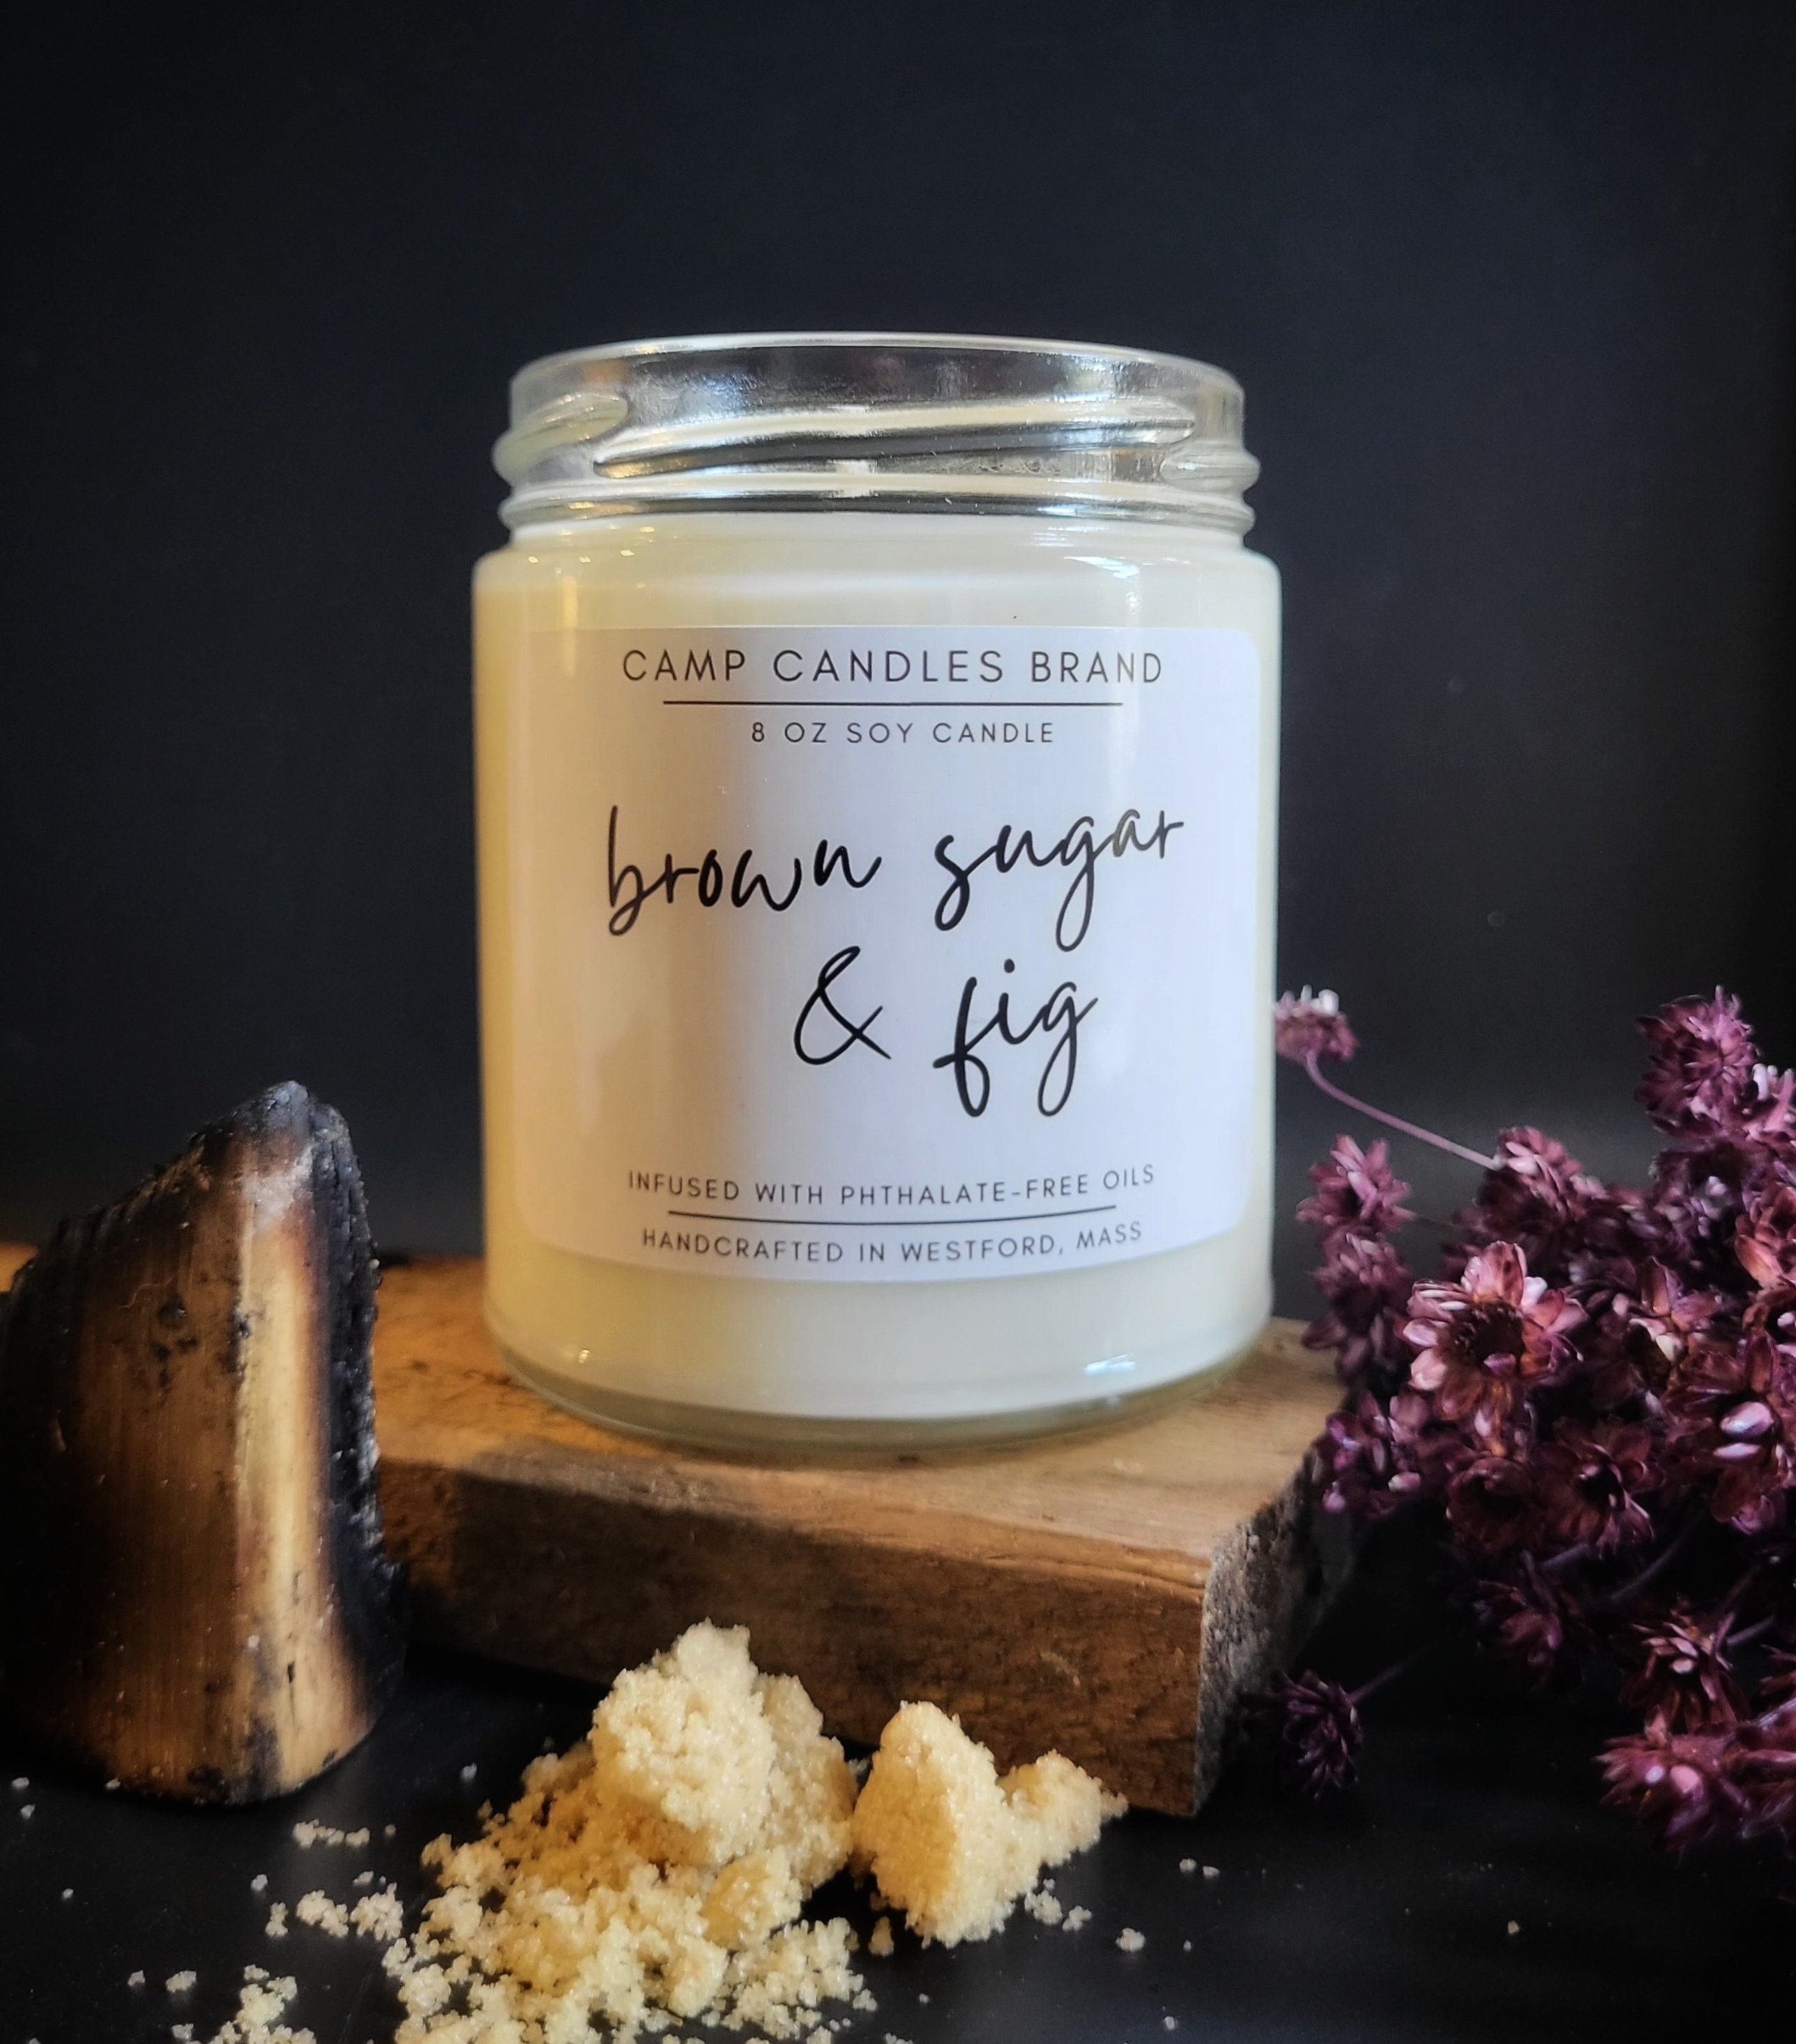 Mediterranean Fig Scented Soy Candle | 26 oz | Hand-Poured Candles by Uncommon James Home